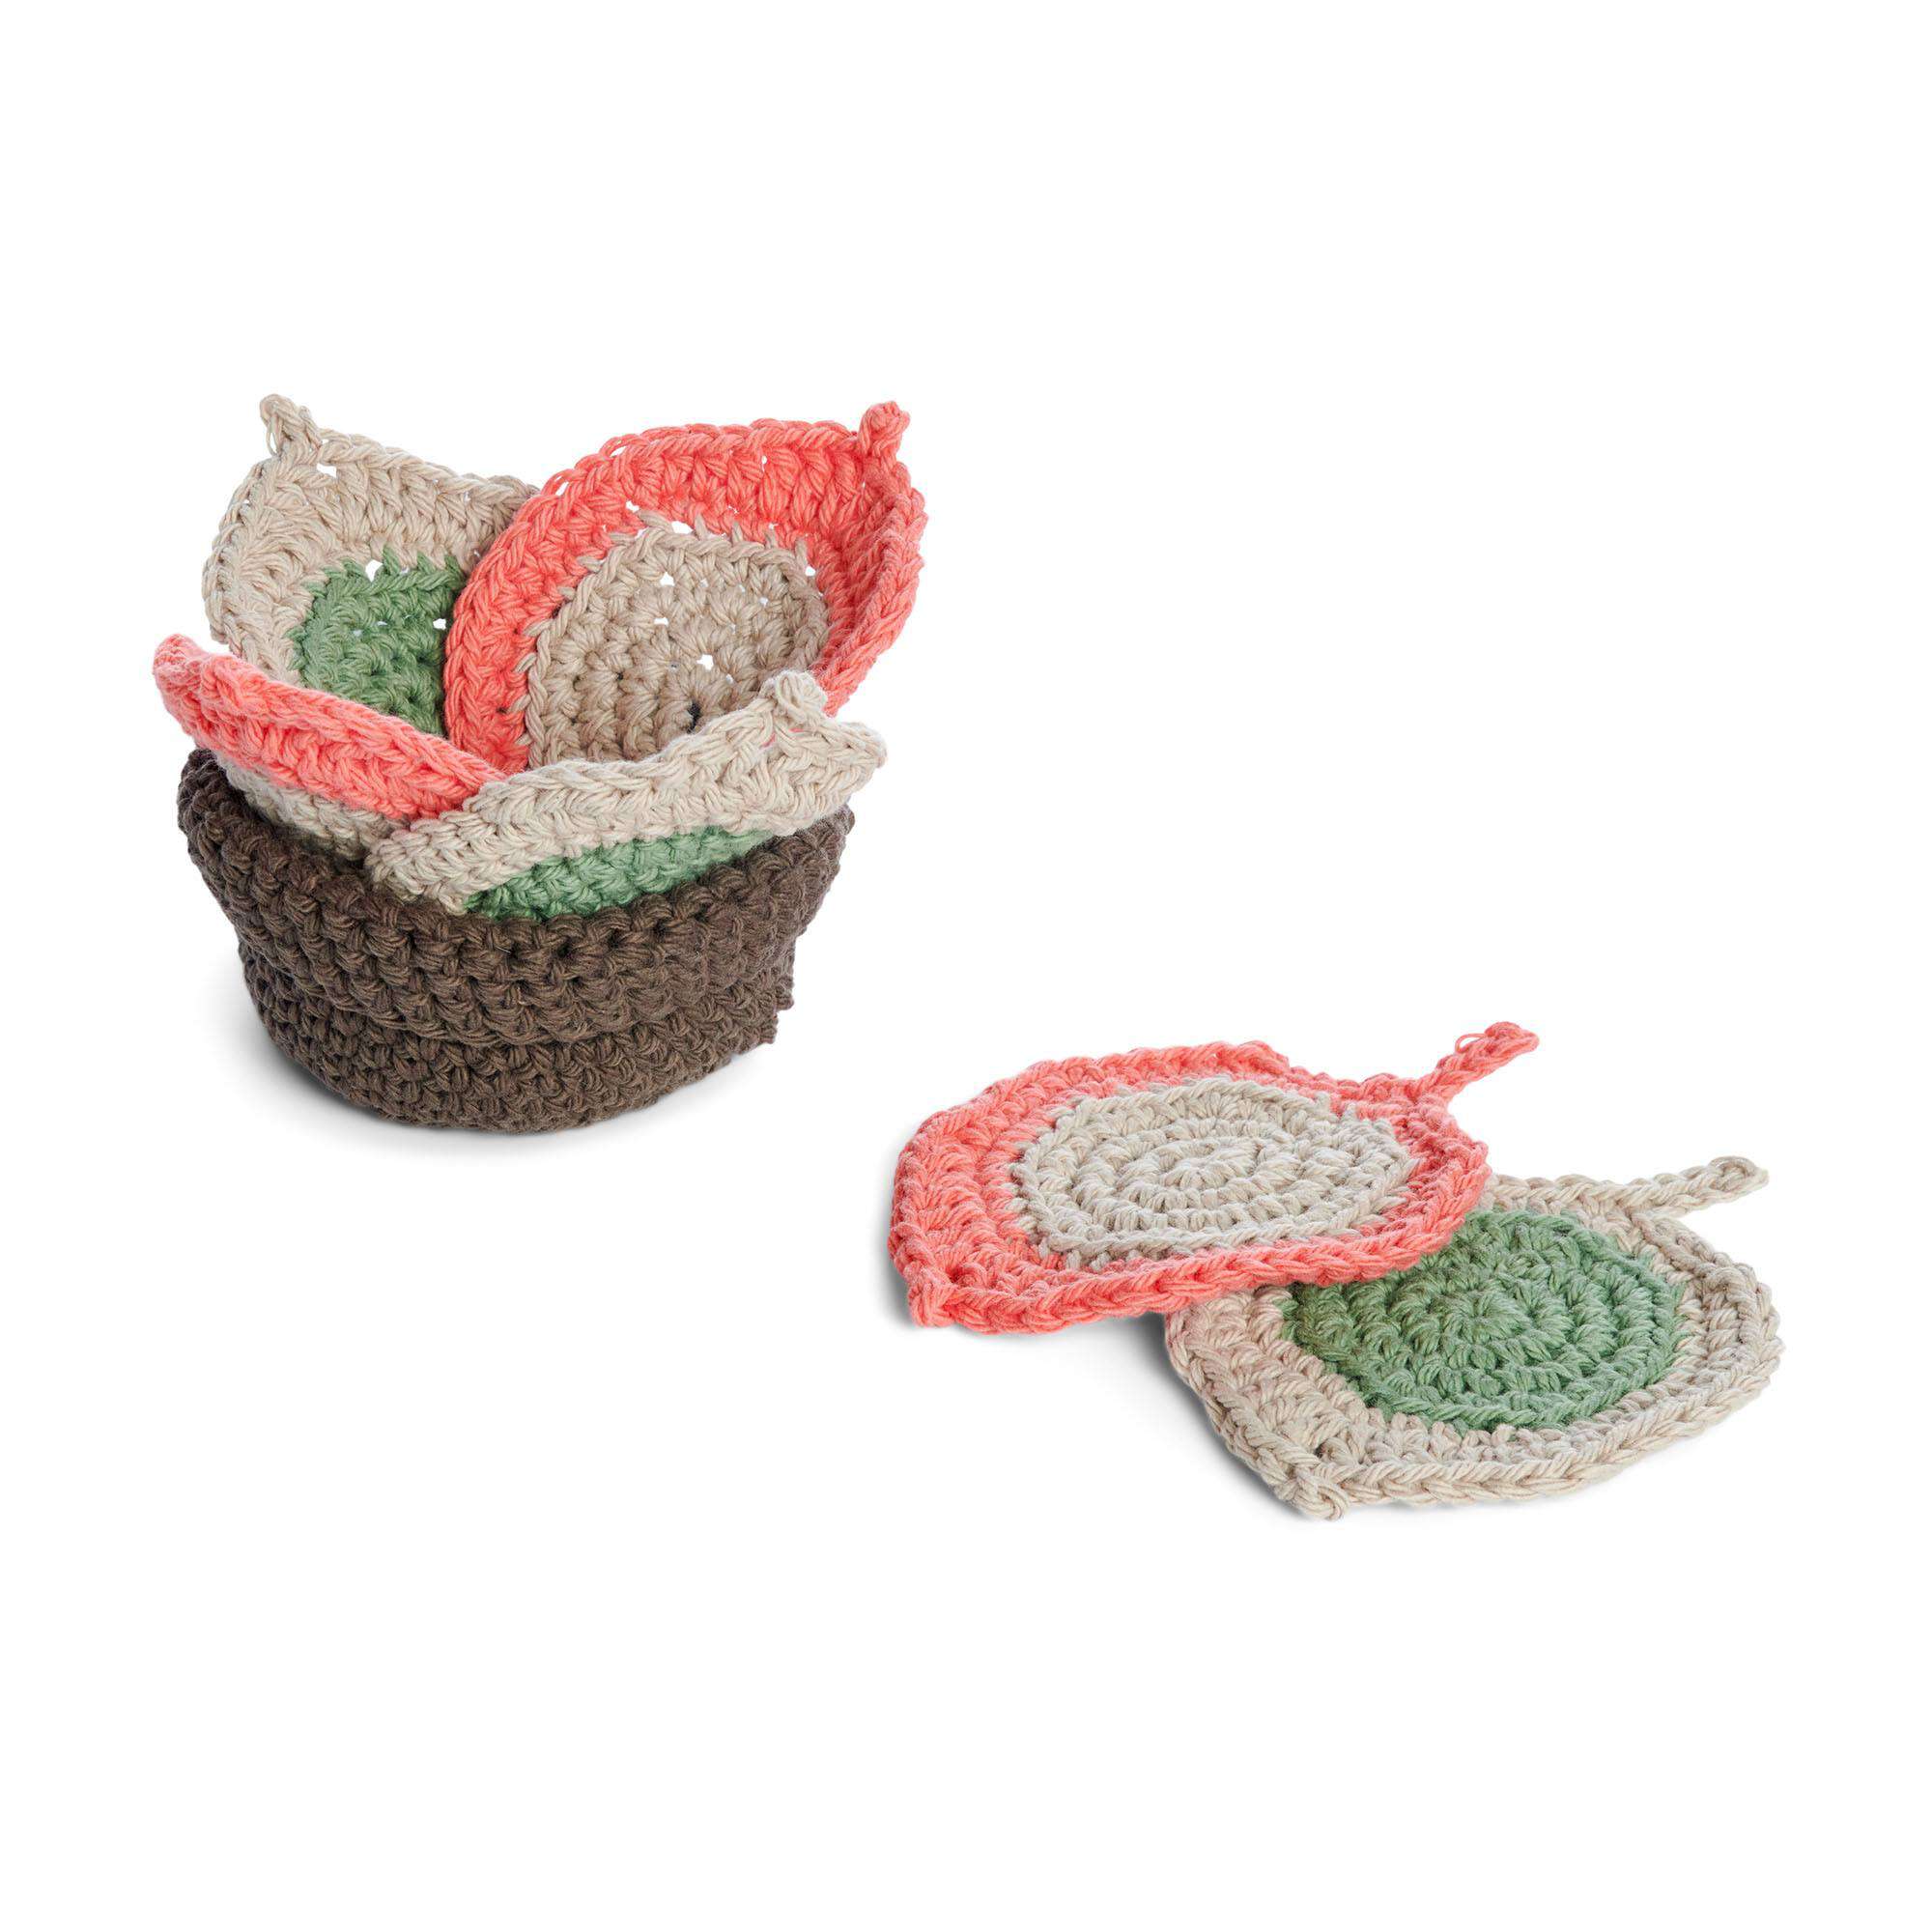 Round Double Crochet Coaster Pattern And Basket